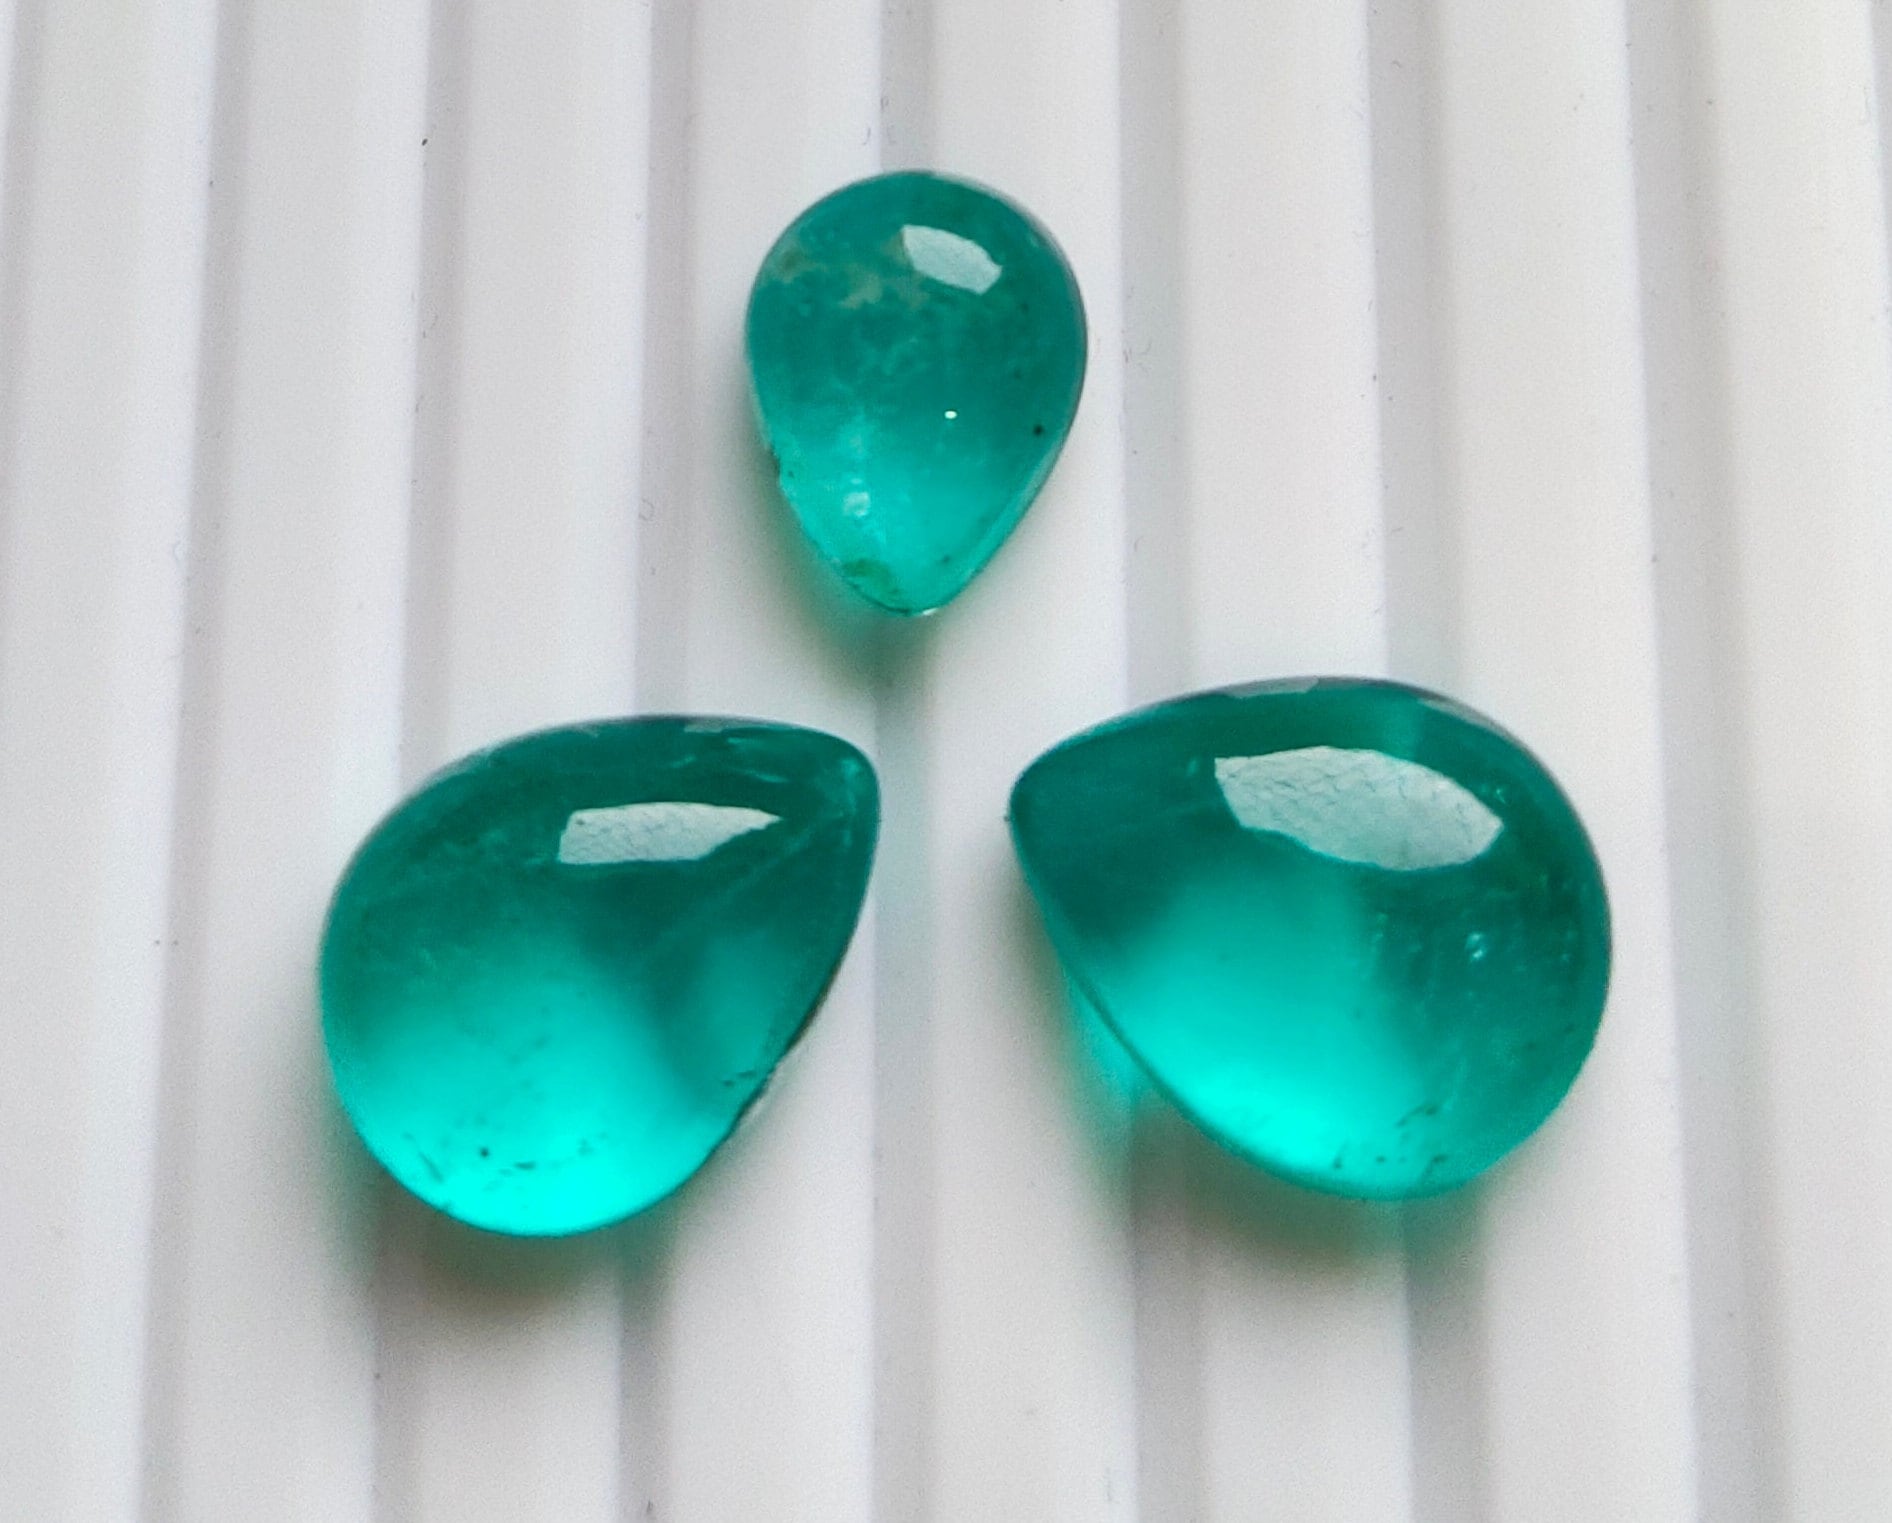 Quality 100% Natural Emerald Doublet Pear Shape Cabochon Loose Gemstone 17 Ct For Making Jewelry 23X16X7 mm R-87 Attractive AAA